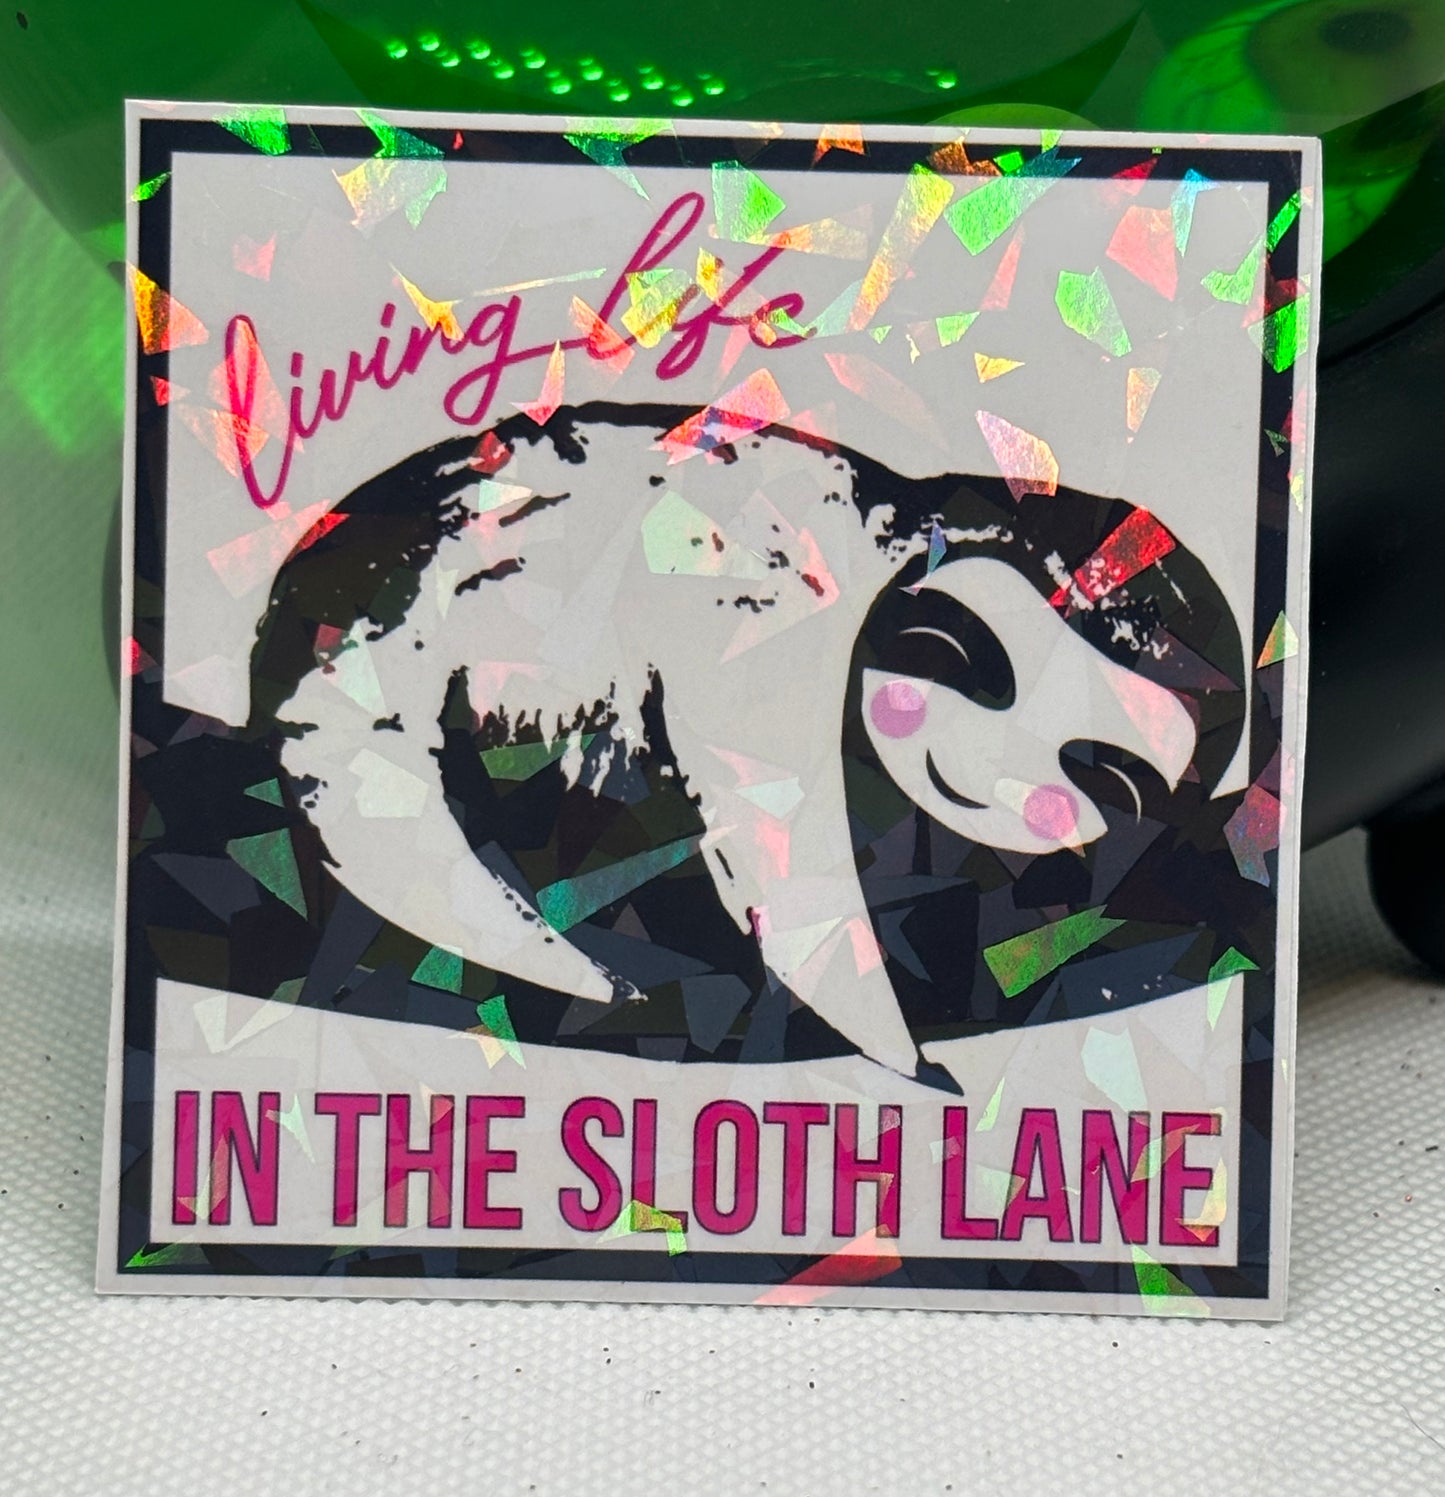 Living Life in the Sloth Lane Sticker